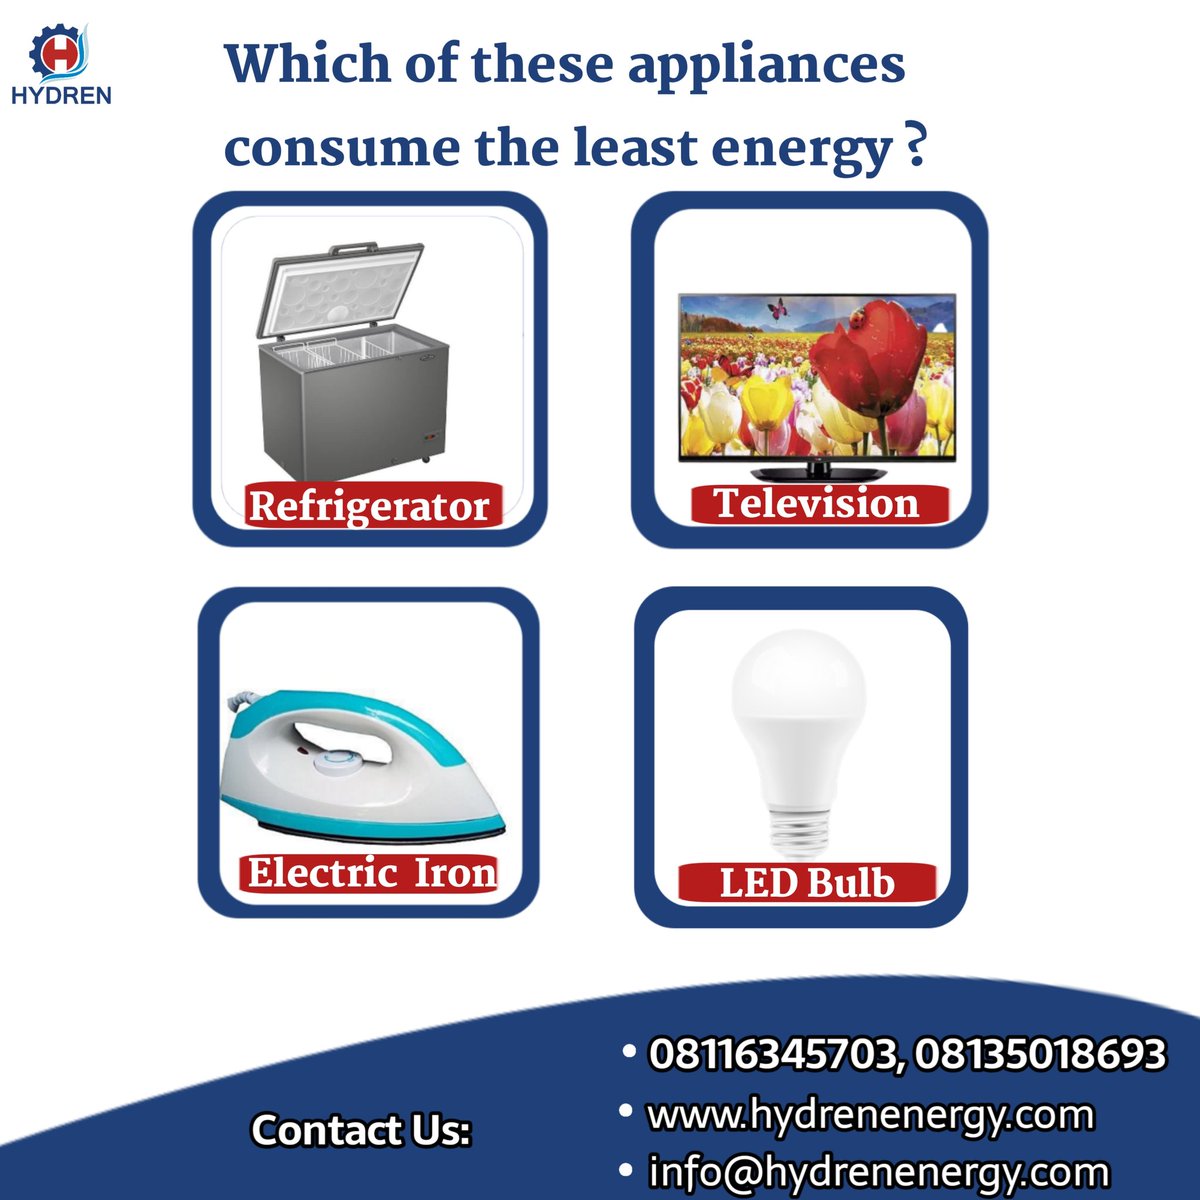 We use different appliances in our homes. Tell us in the comment box, which of these consume the least energy? 

#solar #solarpower #solarenergy #solartechnology #appliances #saveenergy #renewableneergy